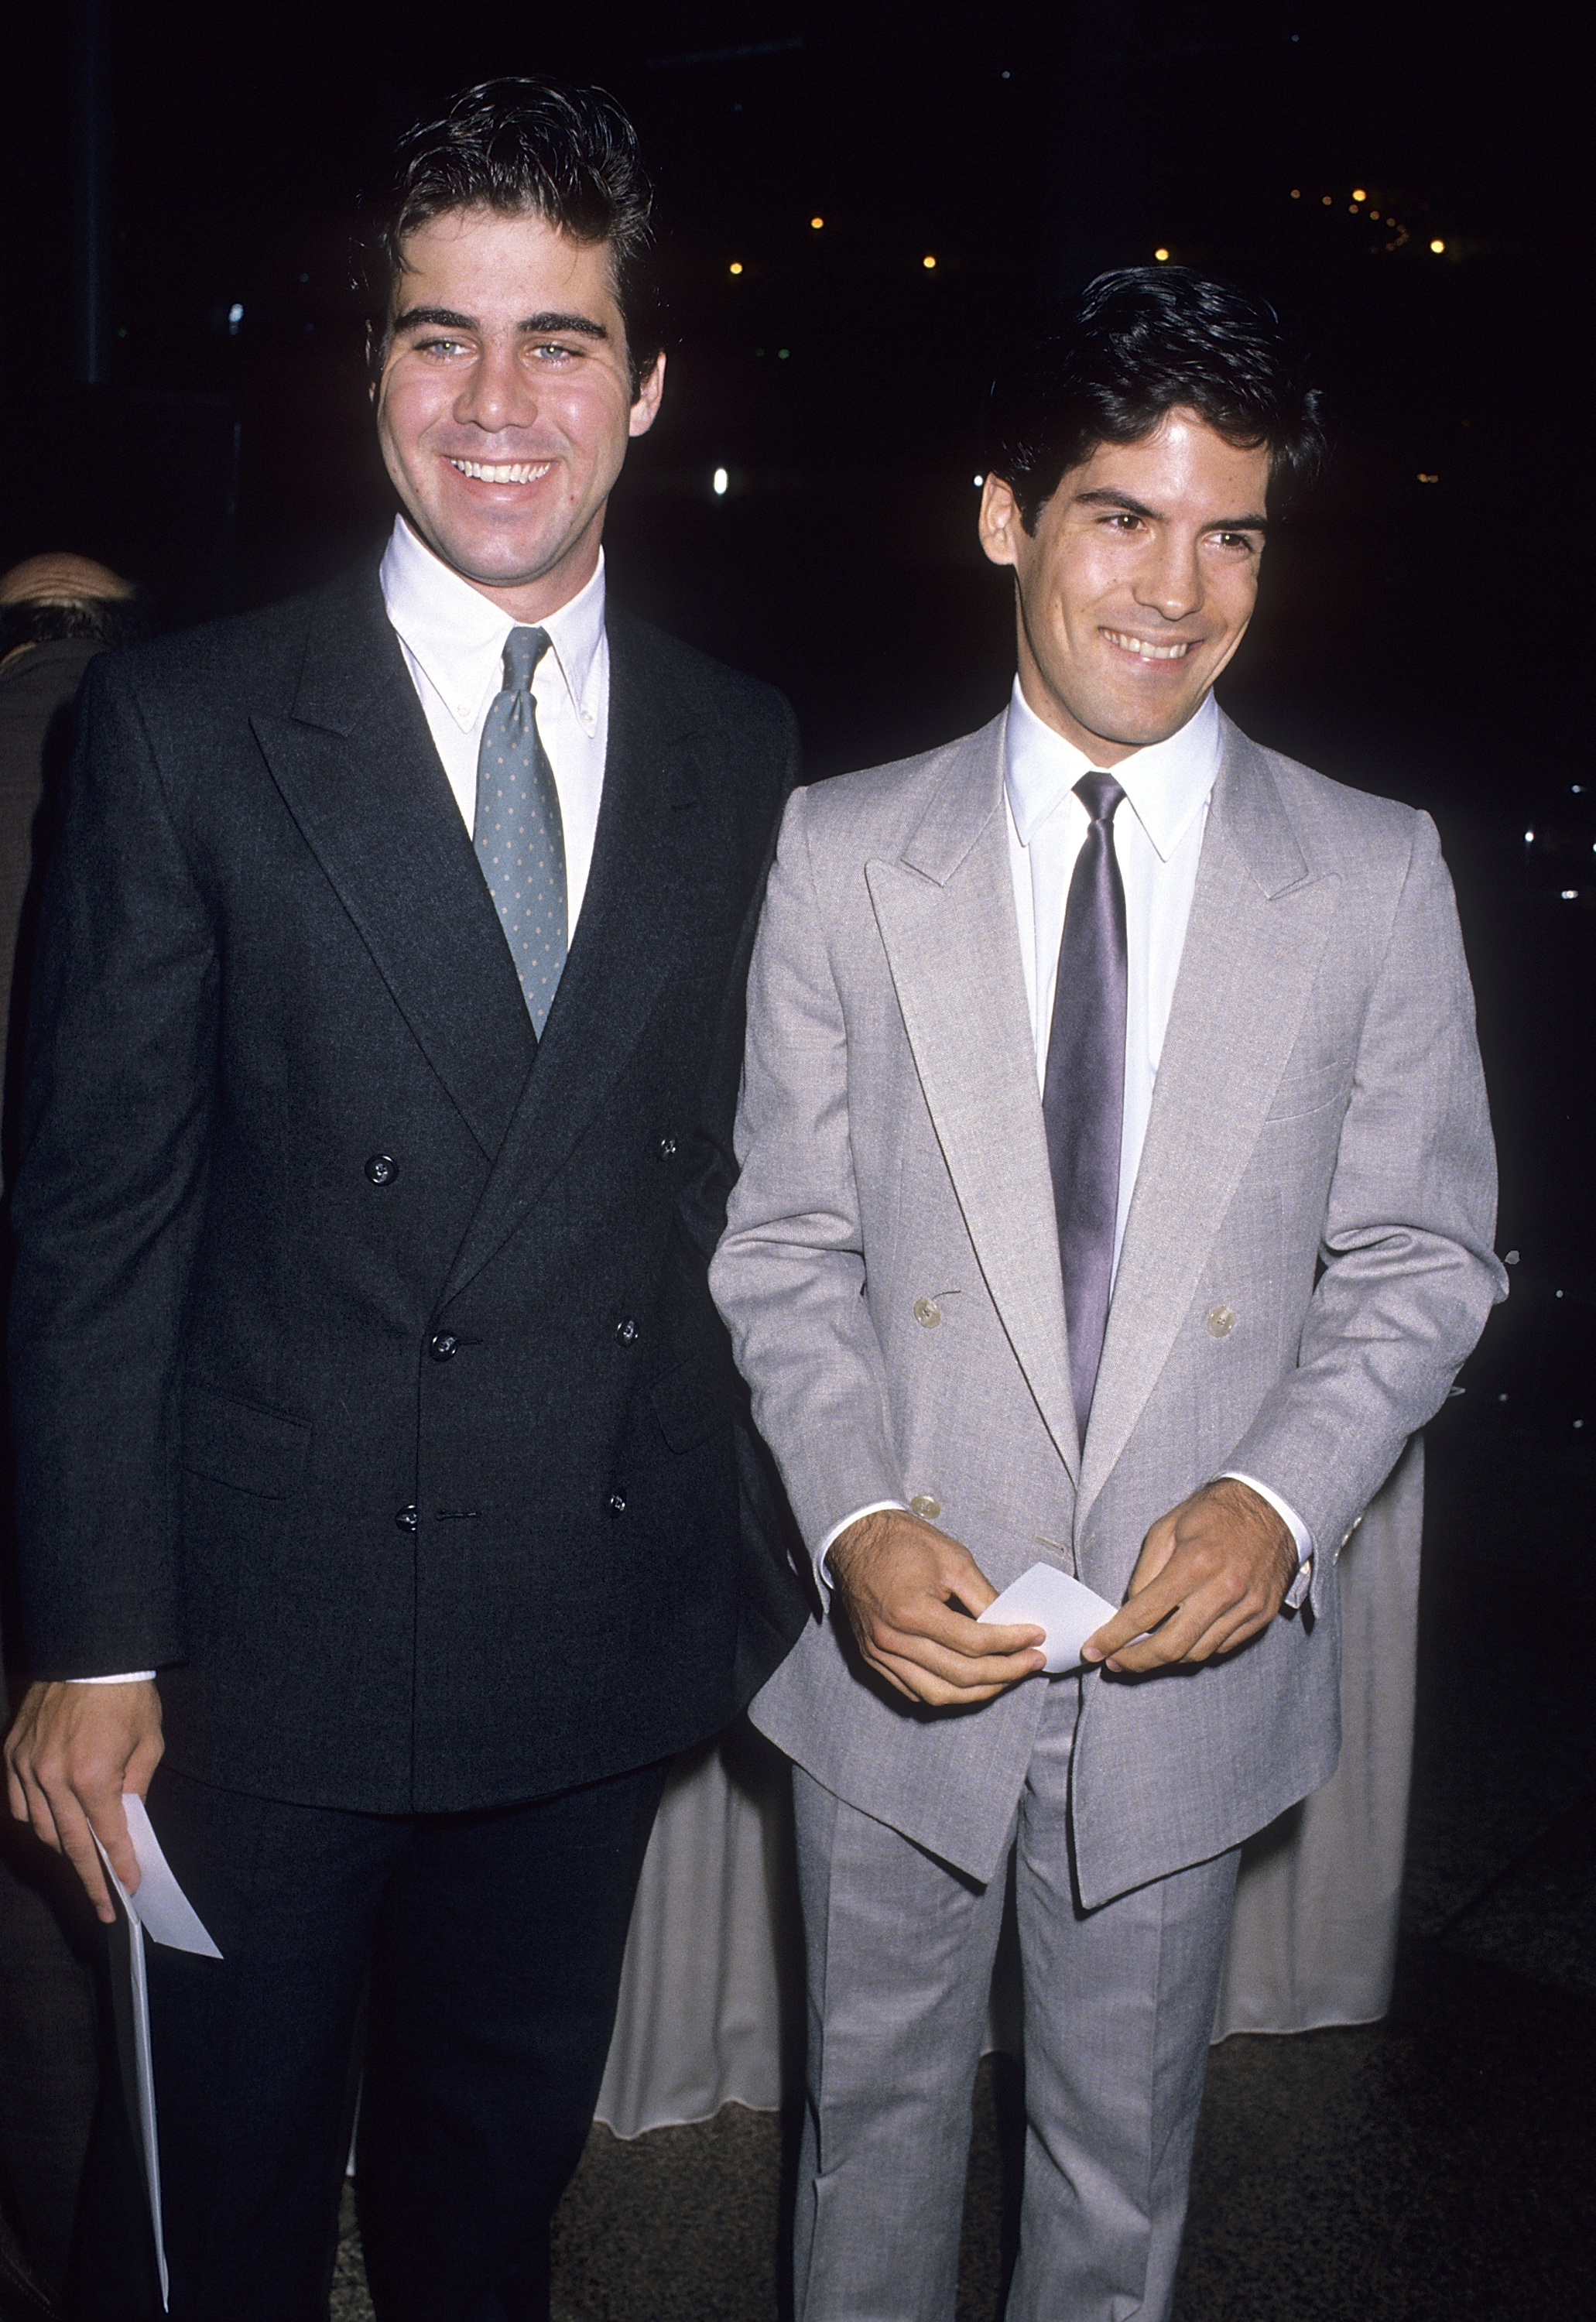 Patrick Labyorteaux and Matthew Laborteaux attend Michael Landon's Second Annual Celebrity Gala at Filmland Center on October 15, 1988 in Culver City, California. | Source: Getty Images